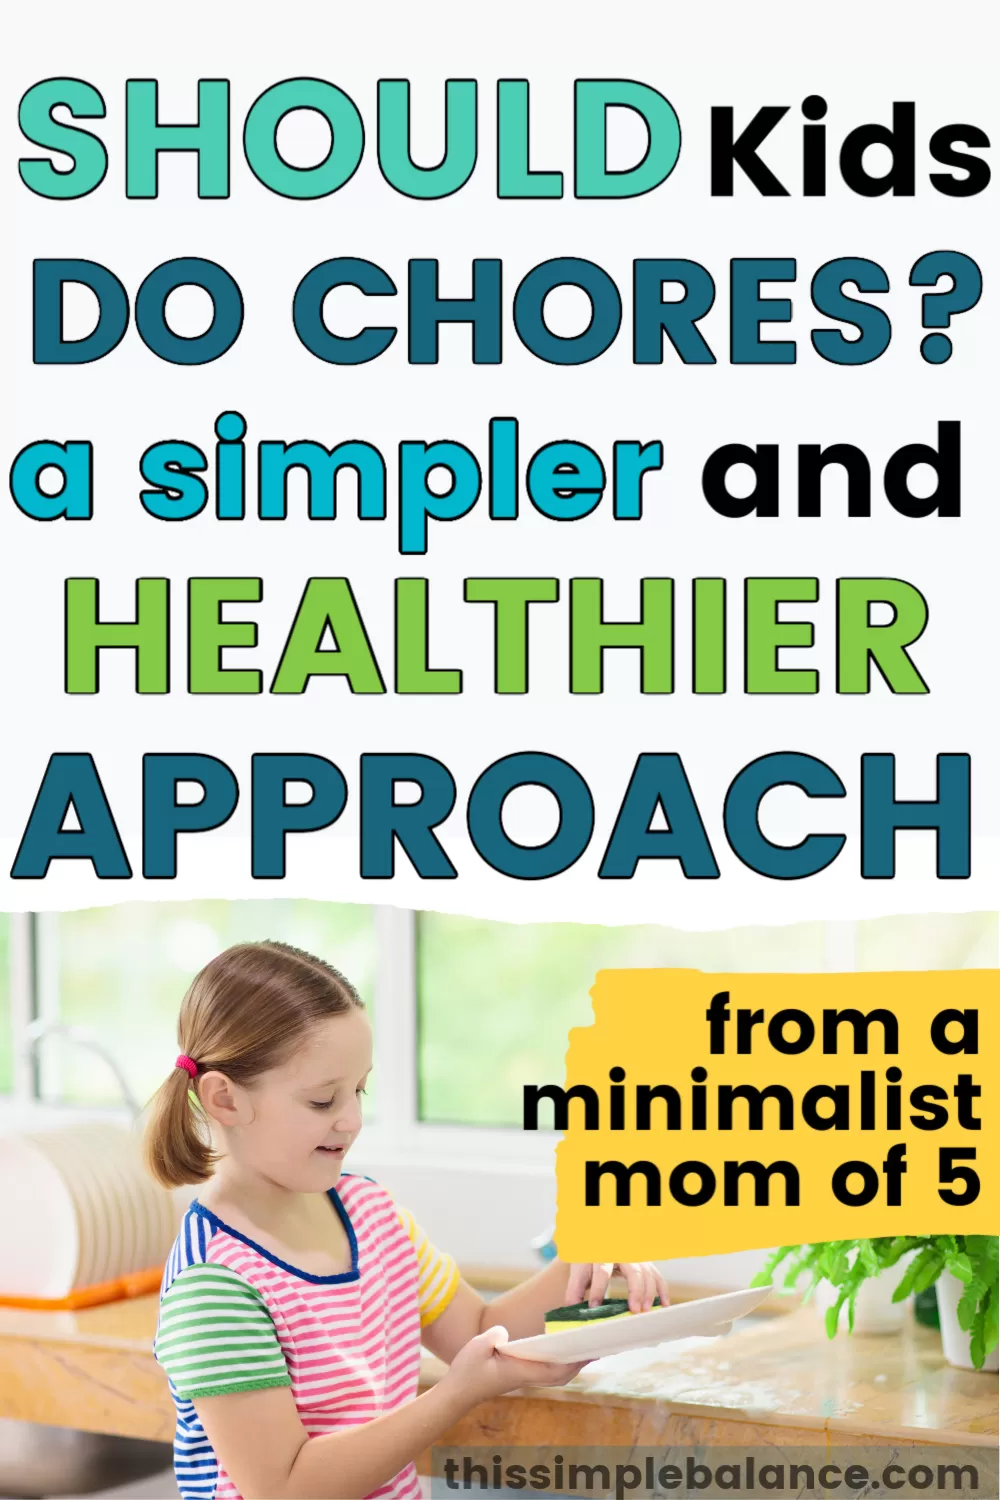 young girl washing dishes with a sponge, with text overlay, "should kids do chores? a simpler and healthier approach - from a minimalist mom of 5"